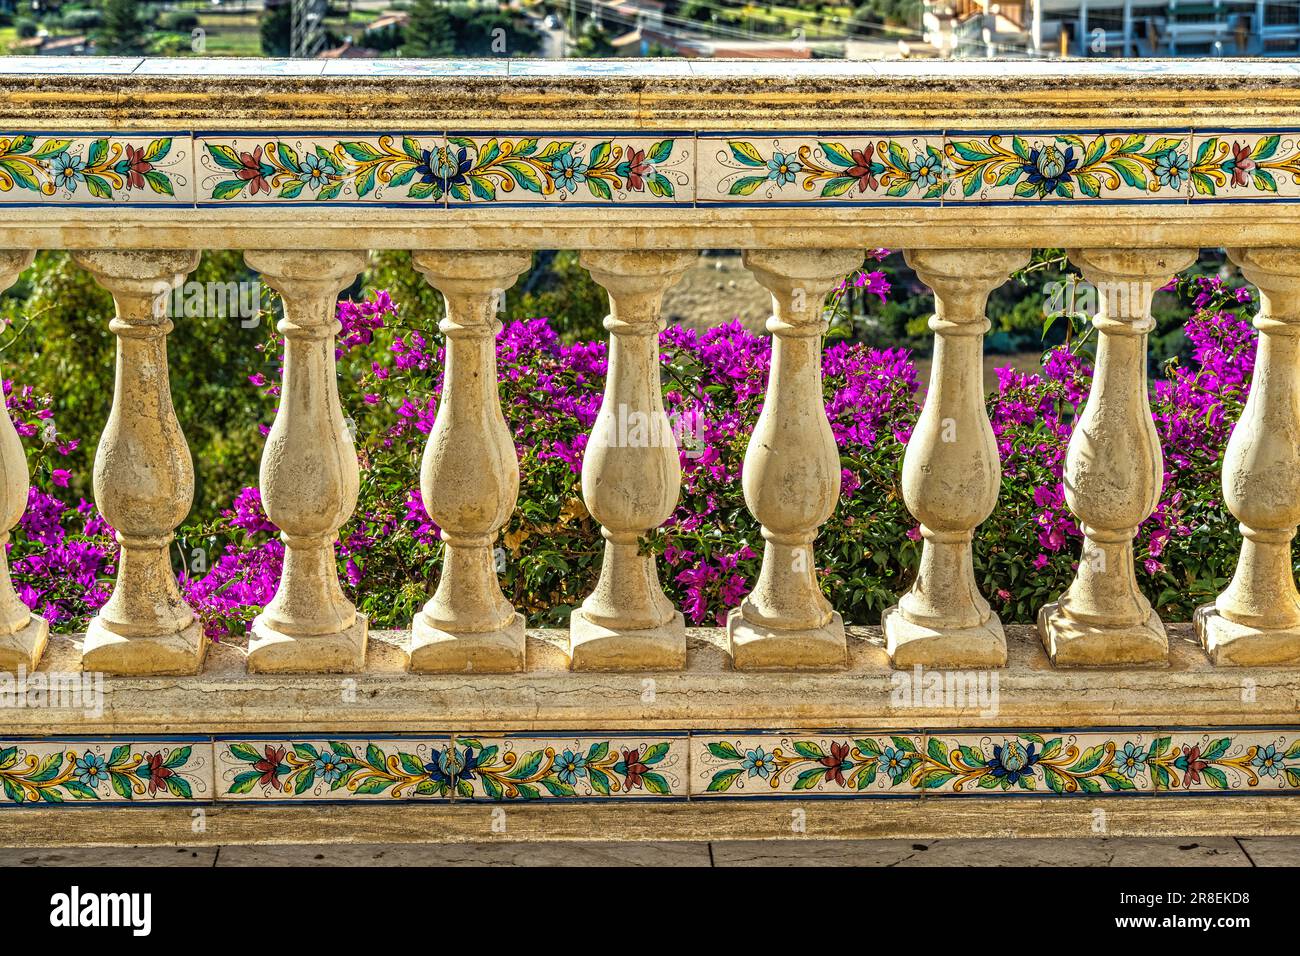 Carved handrail with ceramic pattern and surmounted by a blue basin with a cactus in the city Santo Stefano di Camastra Stock Photo